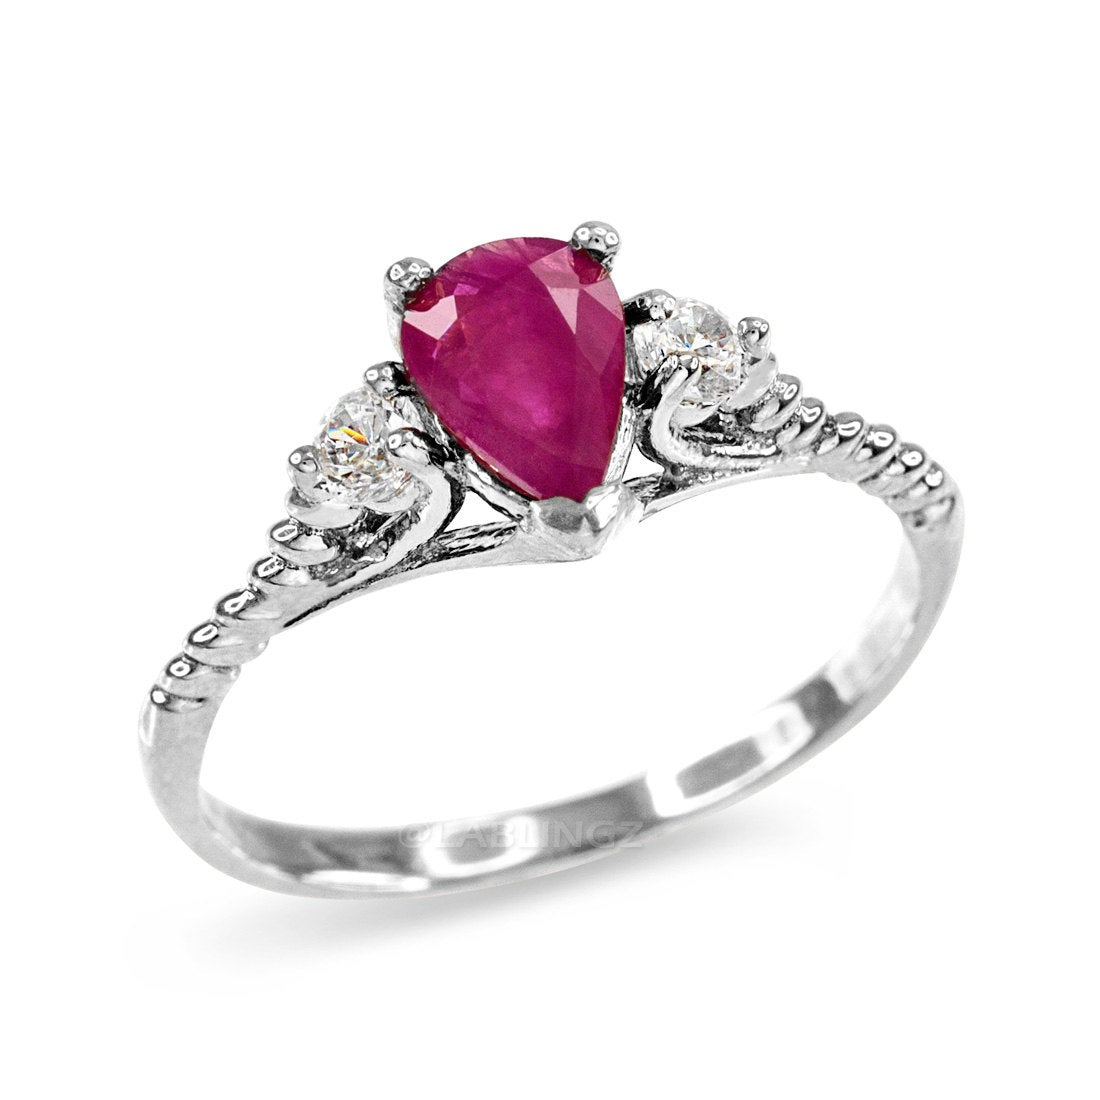 Gold Ruby w/ White Topaz Stackable Promise Ring (yellow, white, rose gold) Karma Blingz